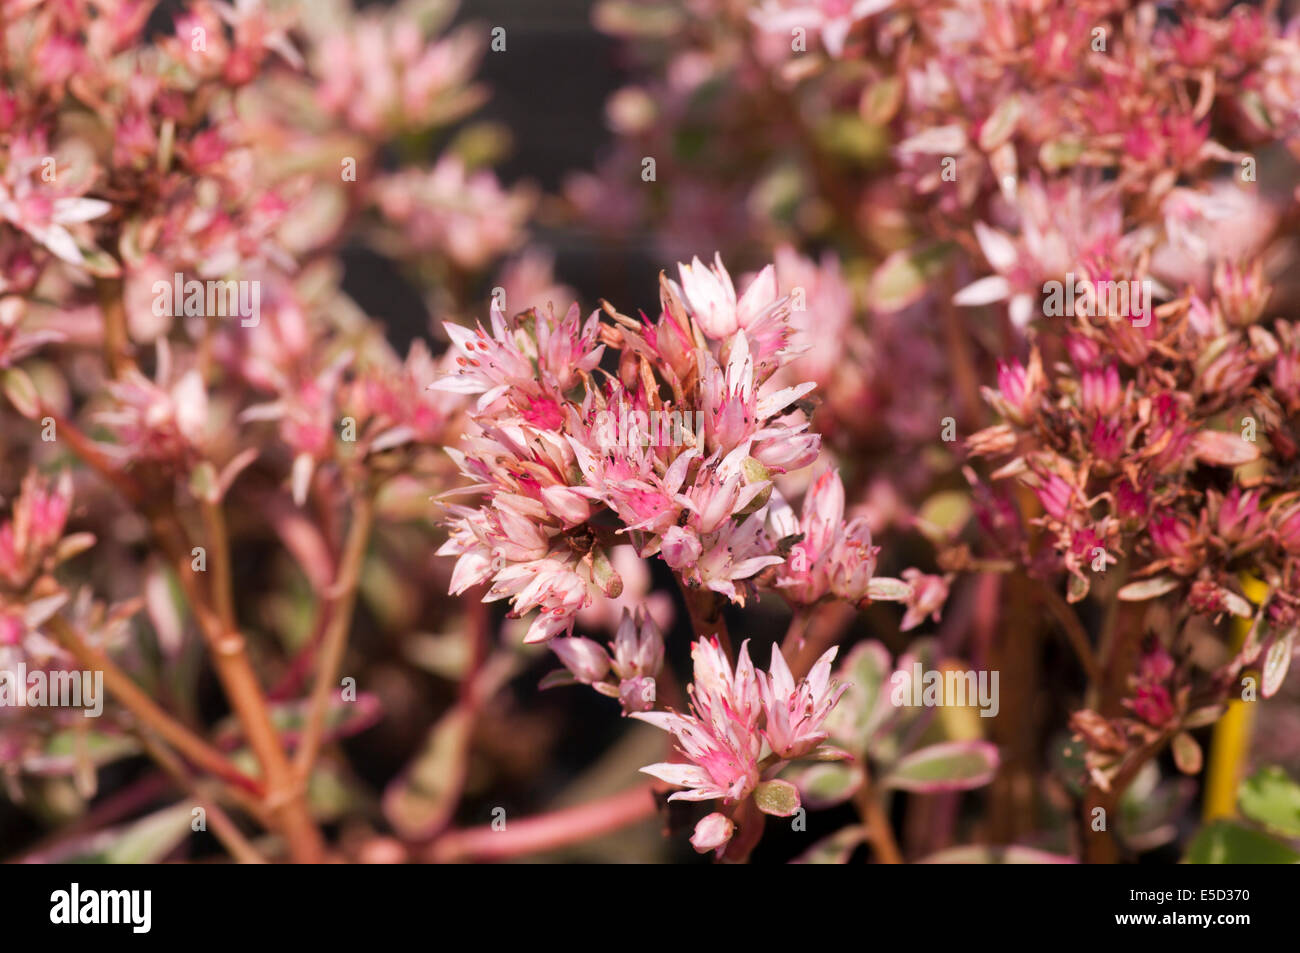 Flowers Of Sedum Spurium Commonly Known as Stonecrops Stock Photo